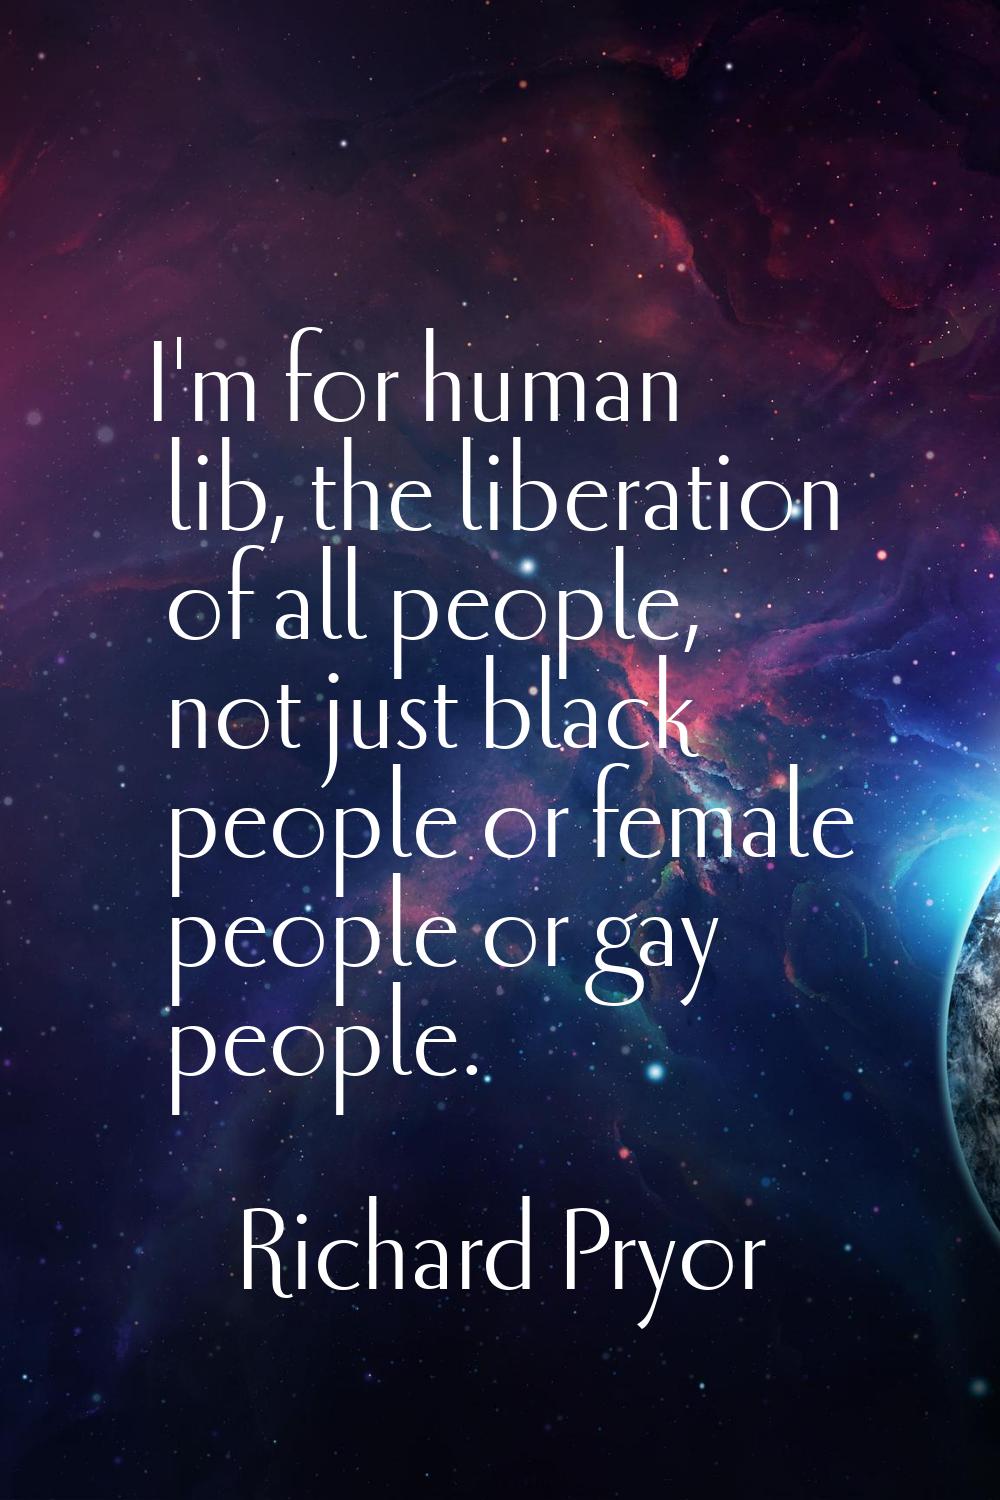 I'm for human lib, the liberation of all people, not just black people or female people or gay peop